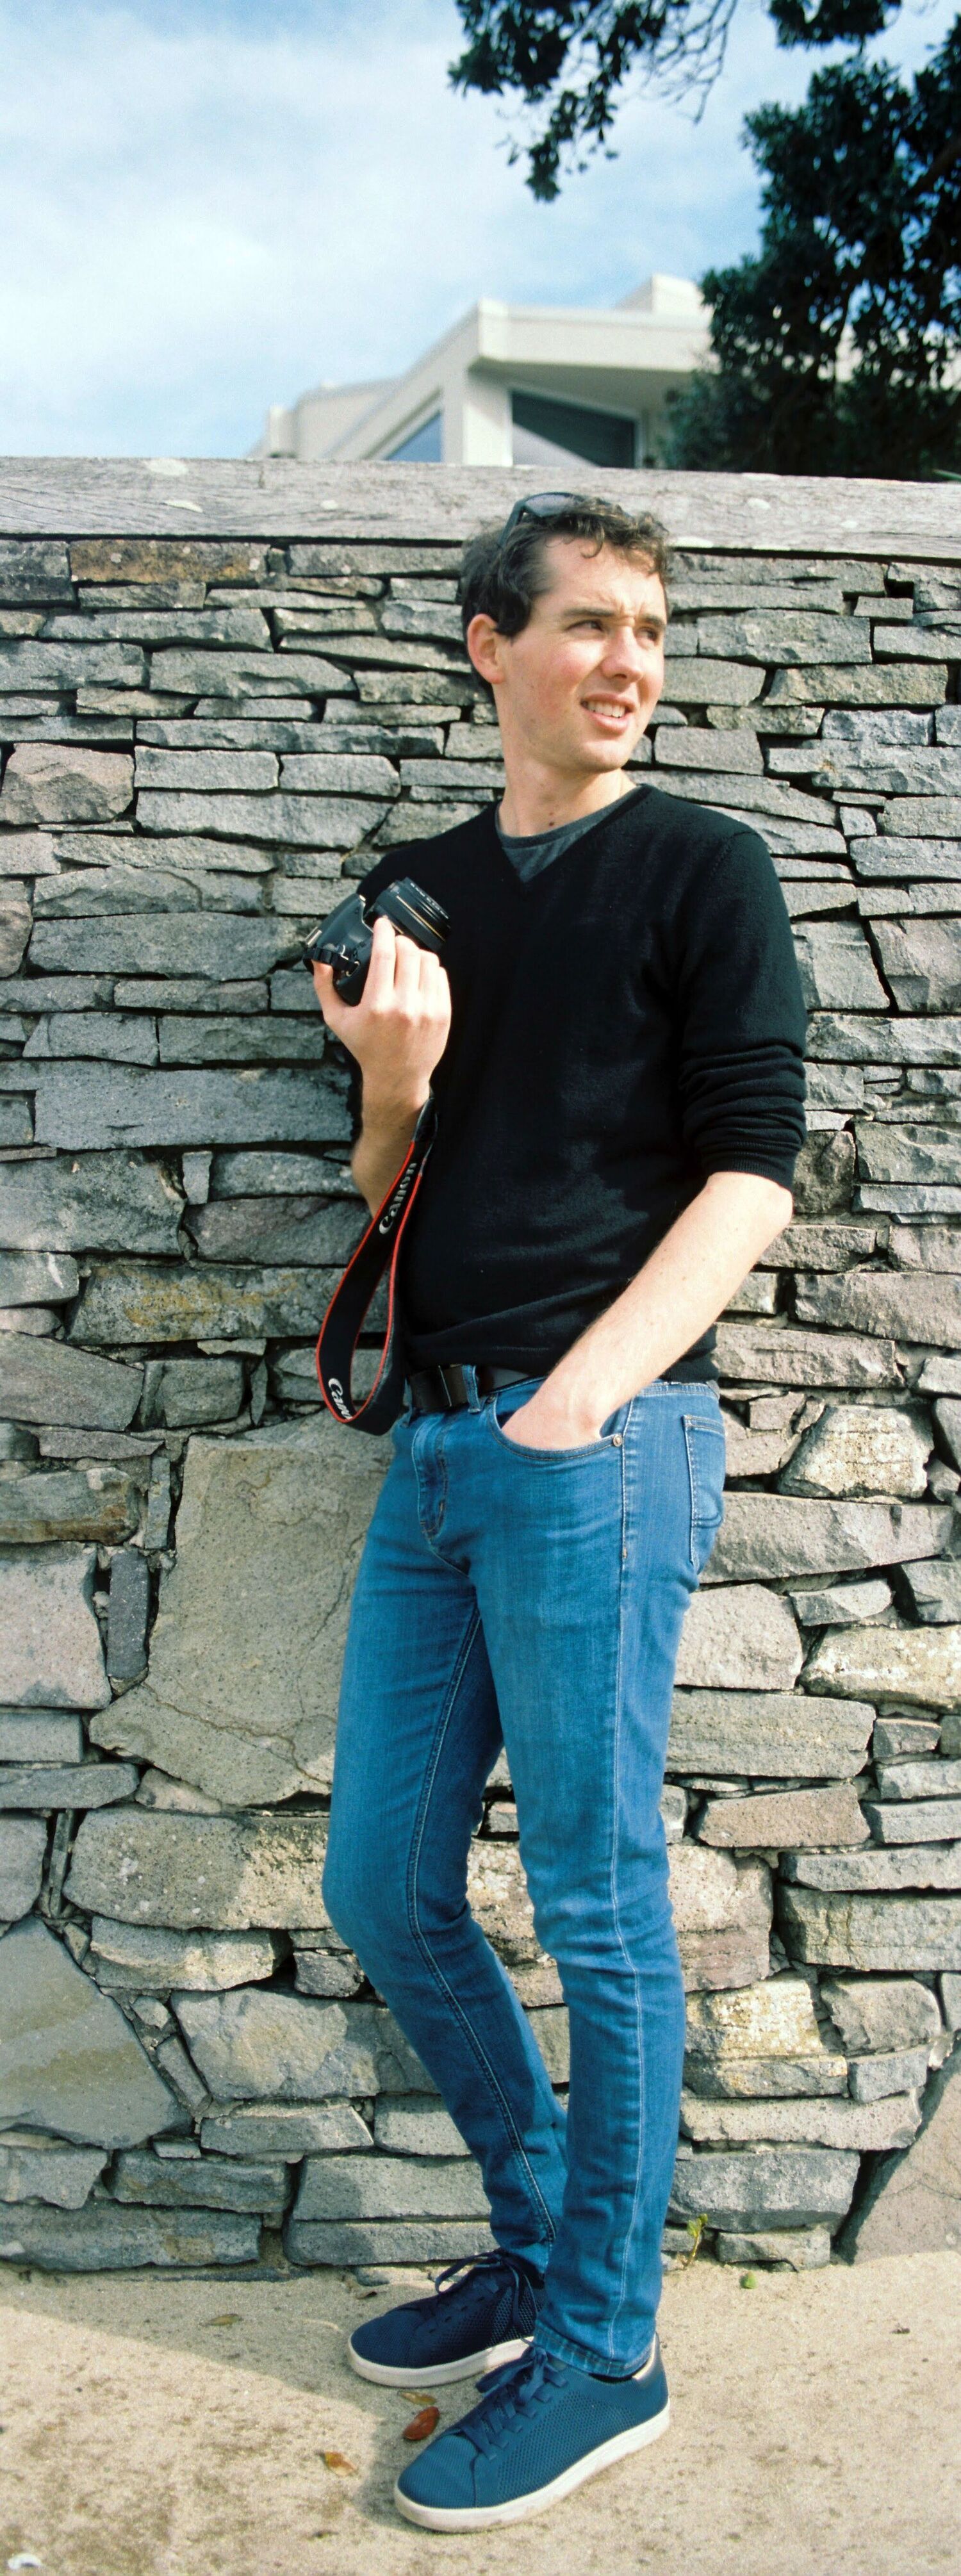 Vertical panorama of Byron posing with his camera up against a stone wall